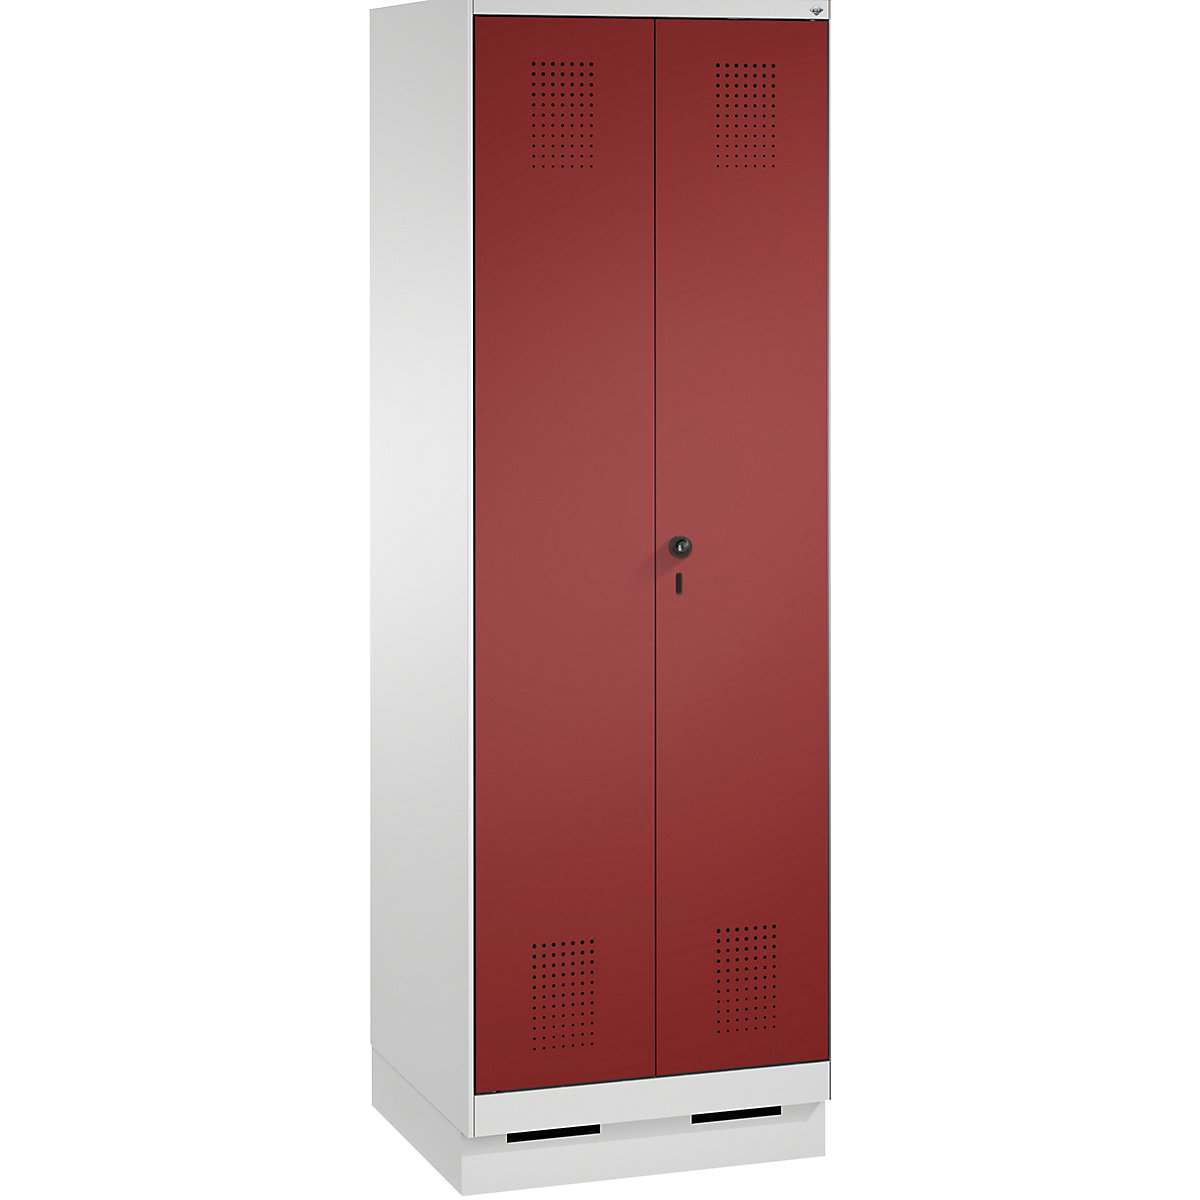 EVOLO laundry cupboard / cloakroom locker – C+P, 4 shelves, clothes rail, compartments 2 x 300 mm, with plinth, light grey / ruby red-9